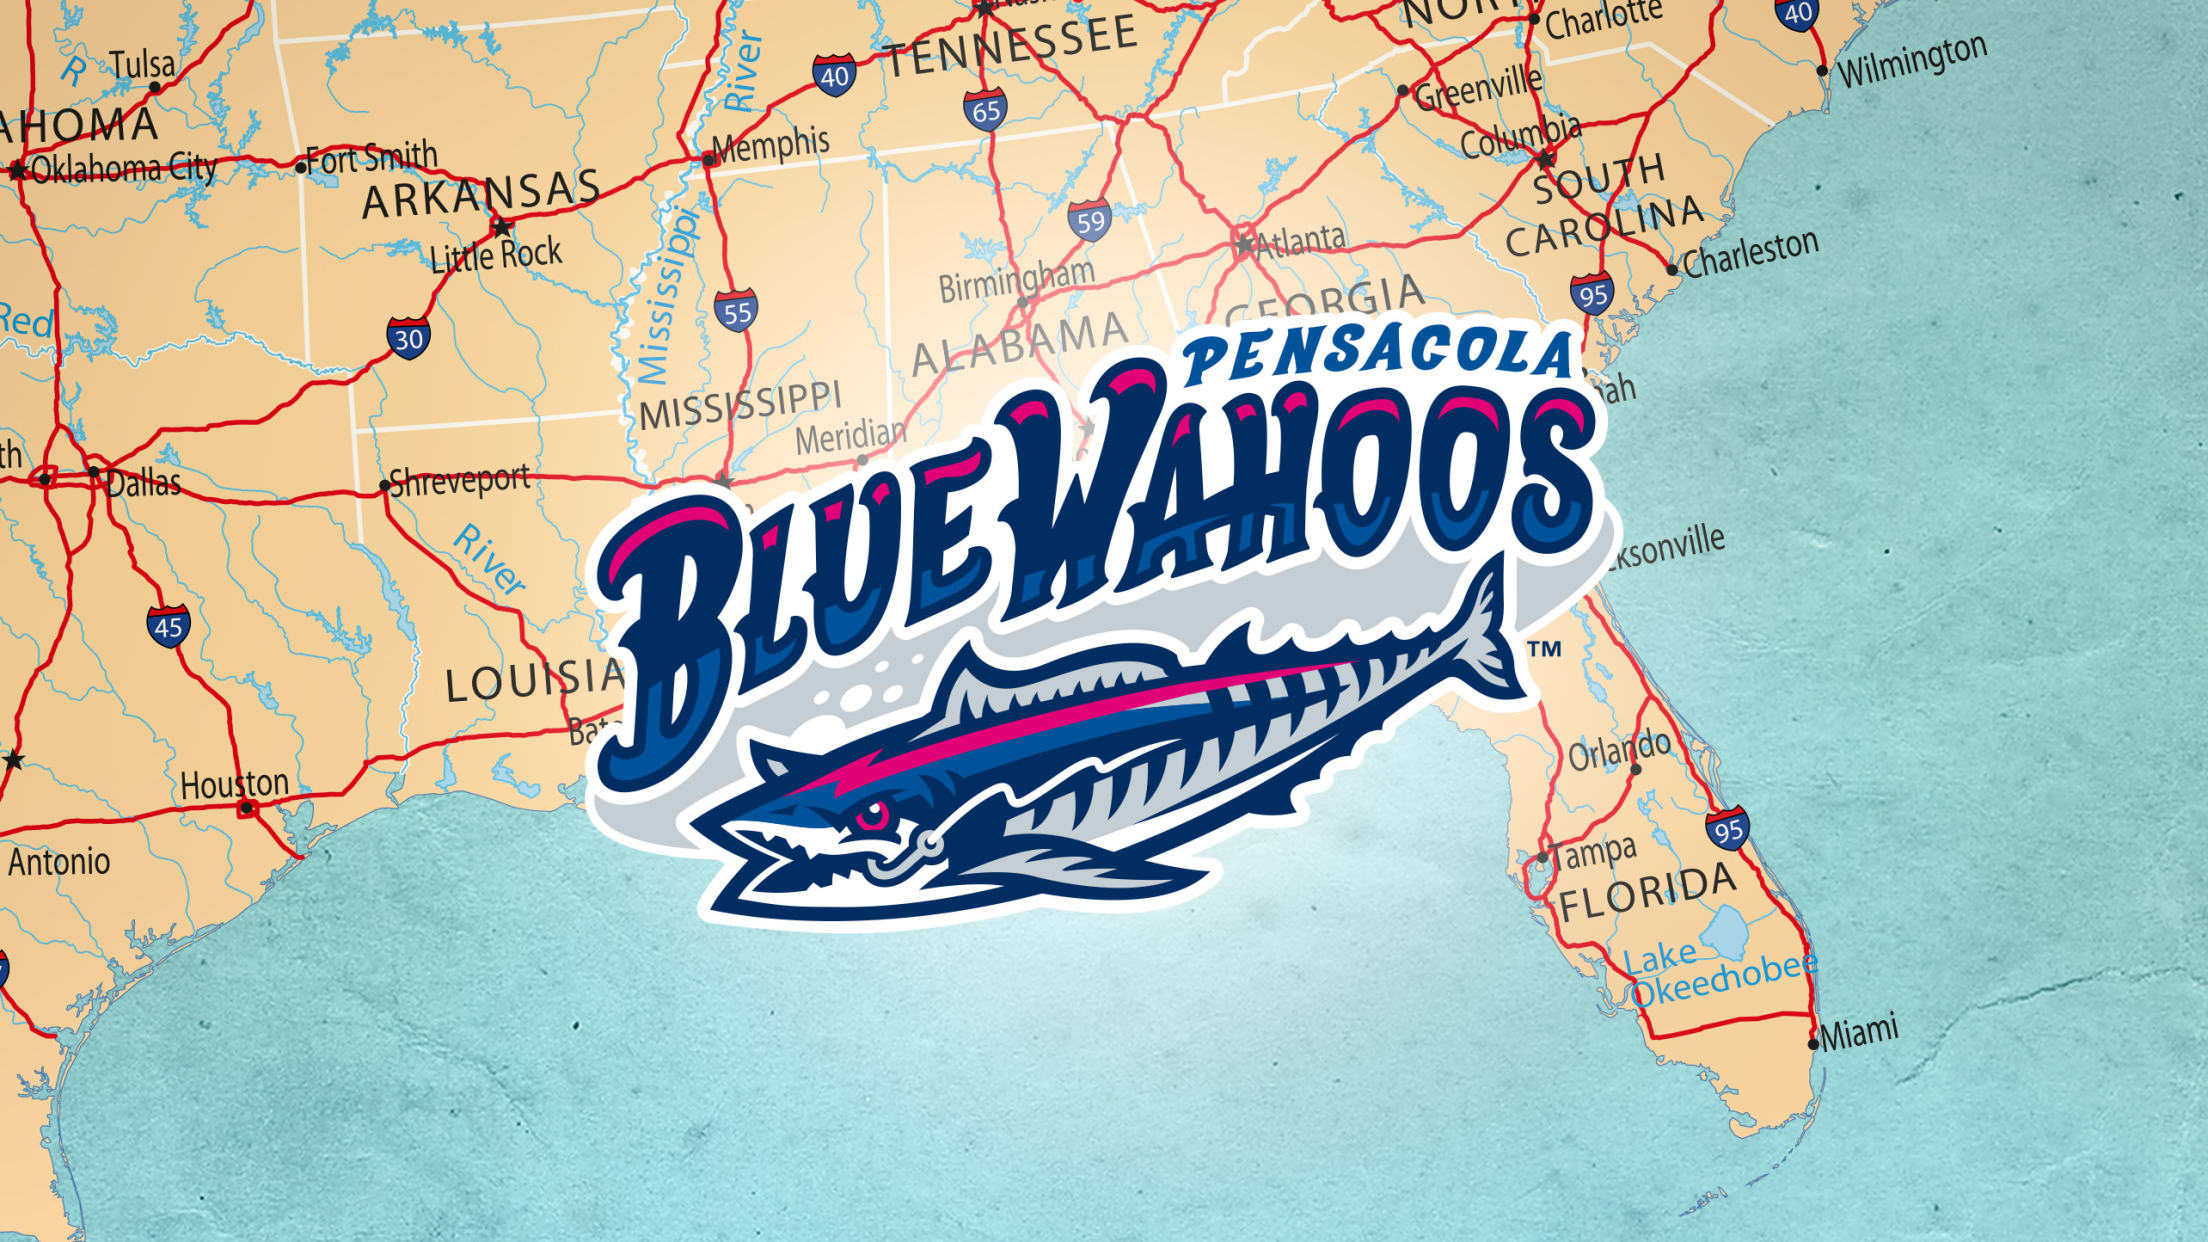 Blue Wahoos to honor military with unique call sign jerseys for